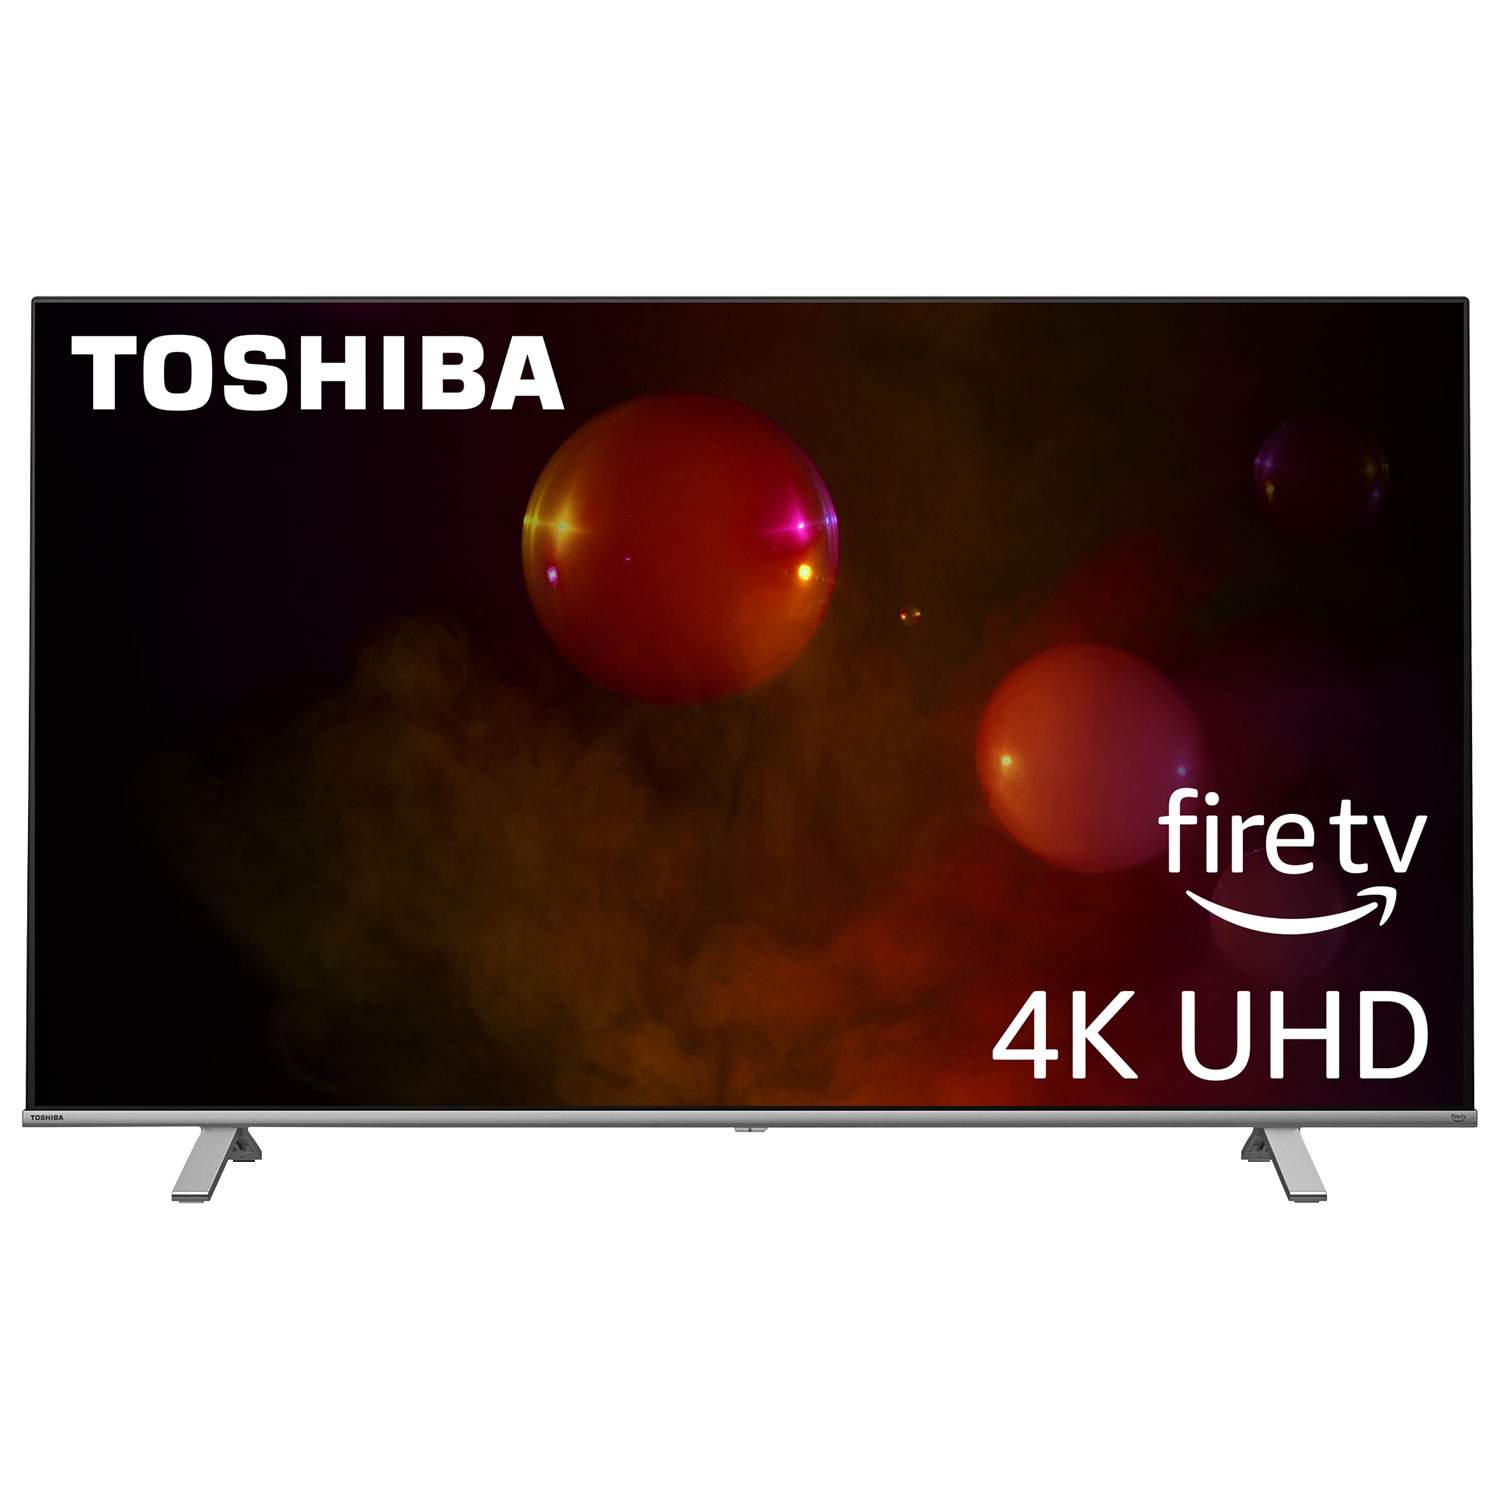 Toshiba 55" 4K UHD HDR LED Smart TV (55C350KC) - Fire TV Edition - 2021 - Only at Best Buy